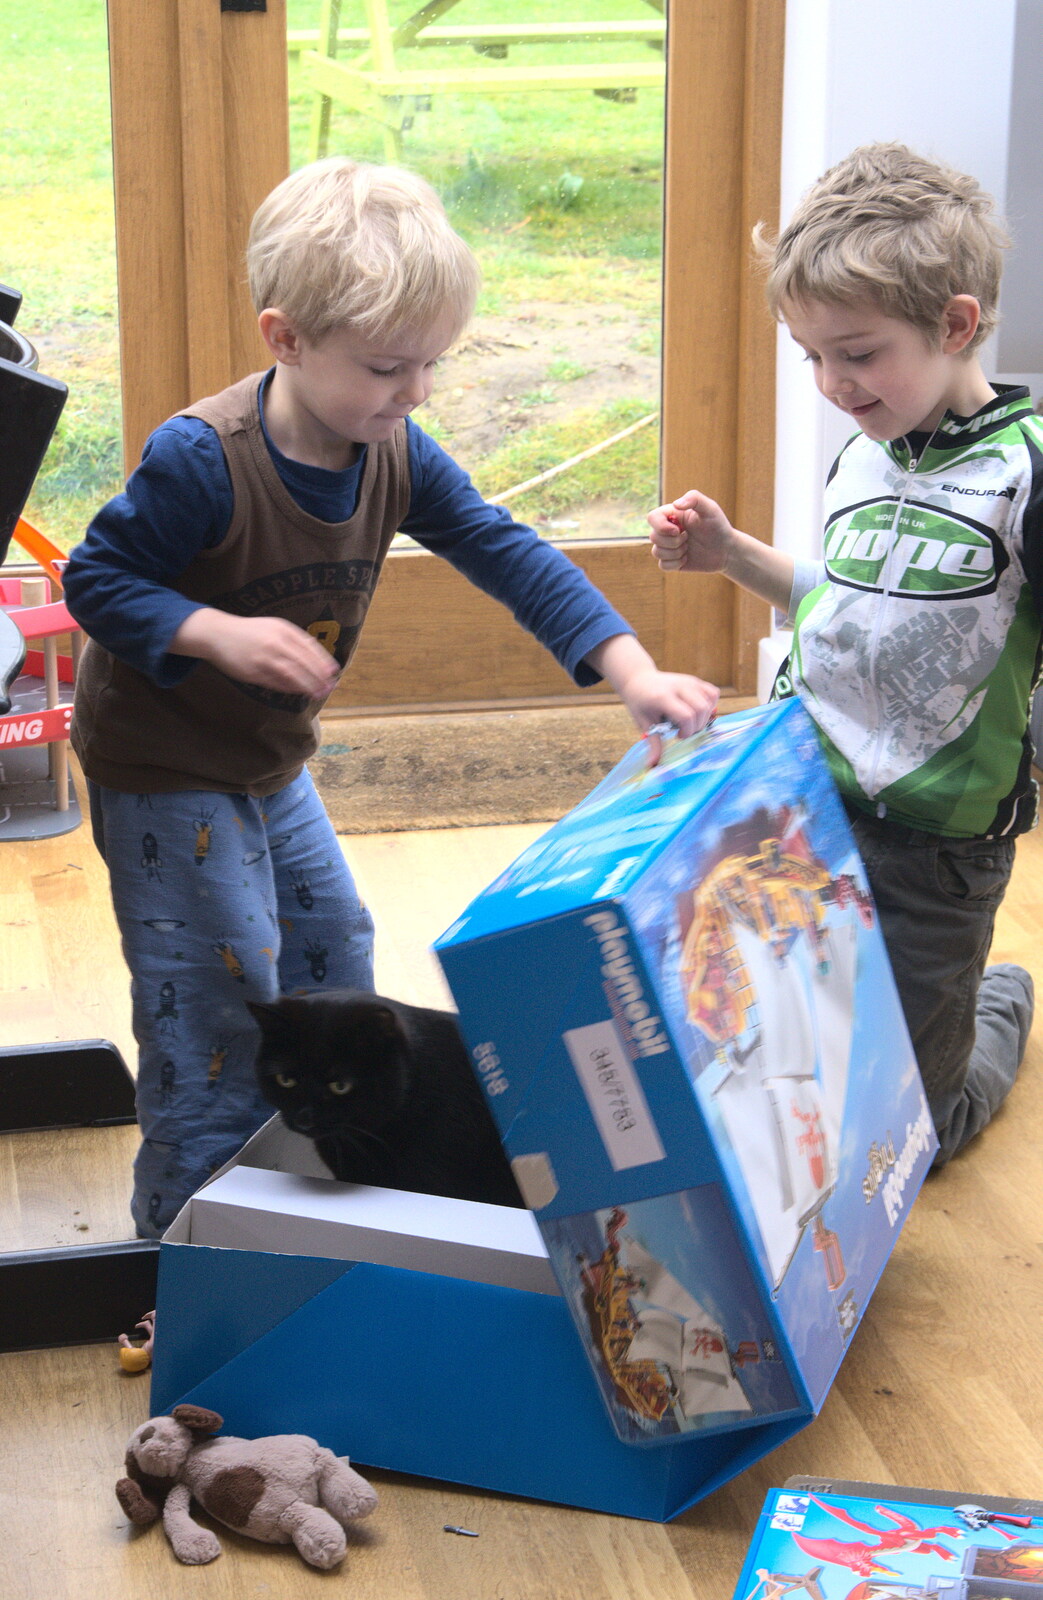 Millie Cat is in Harry's Playmobil box from The Last Day of Pre-School and Beer at the Trowel and Hammer, Cotton, Suffolk - 29th March 2015